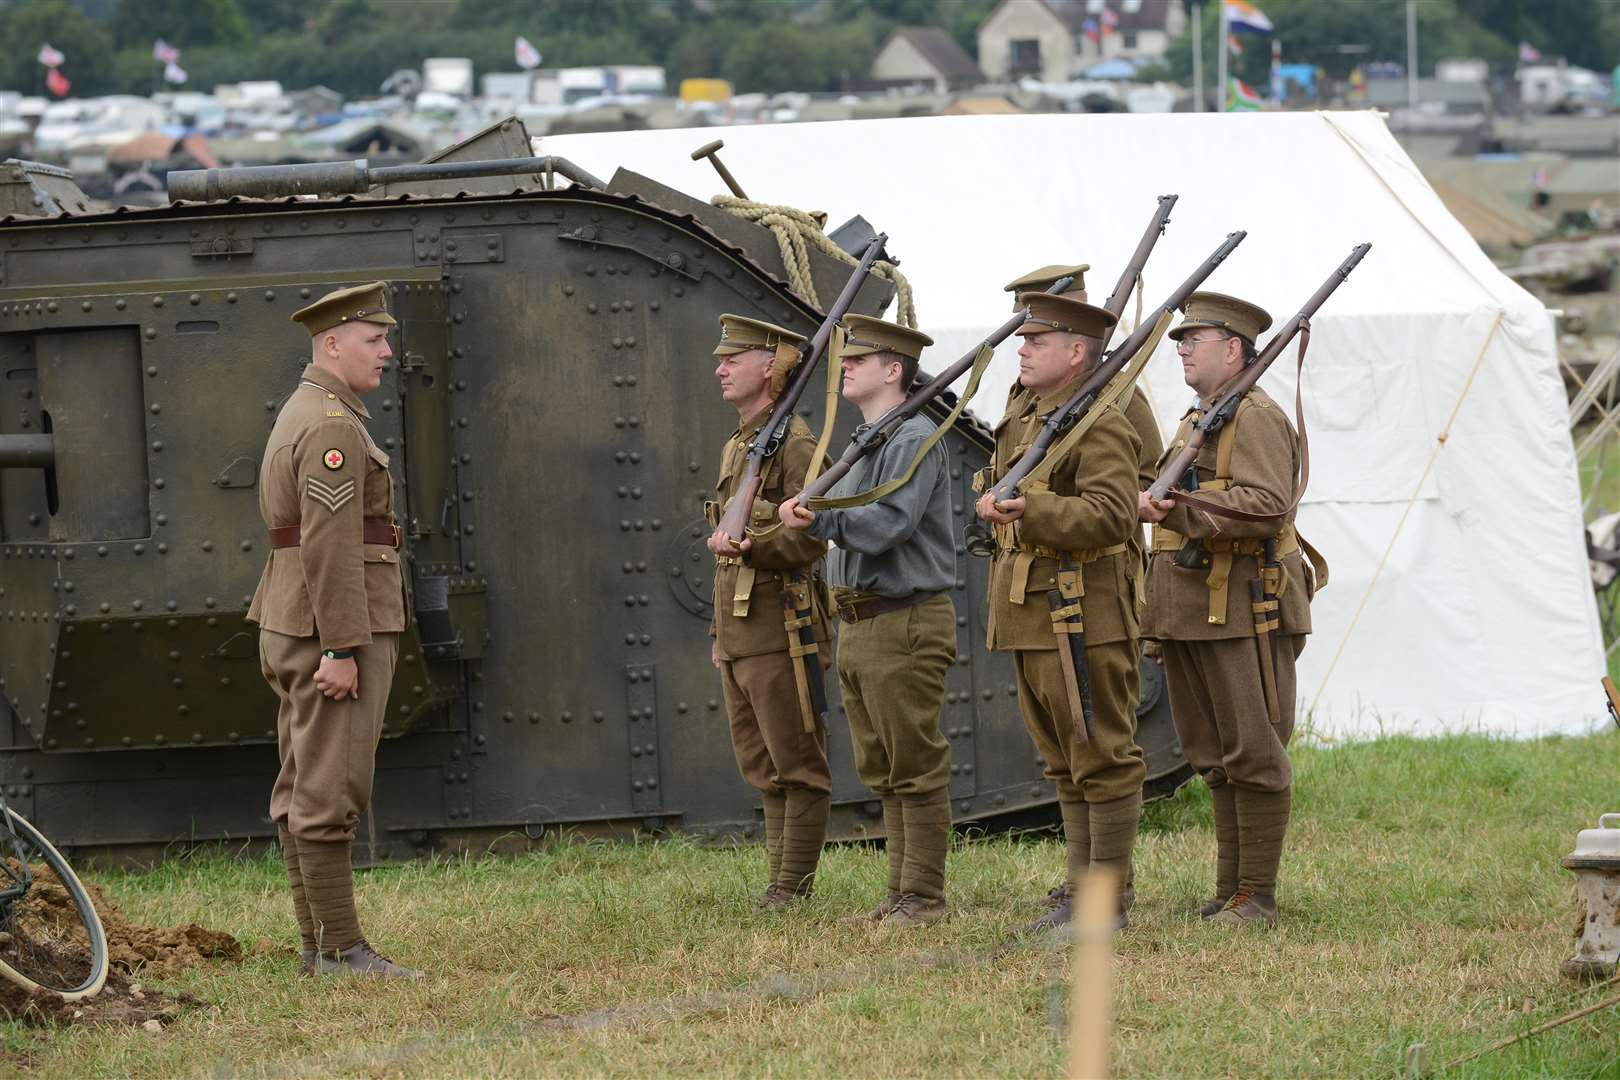 First World War re-enactors War and Peace Revival